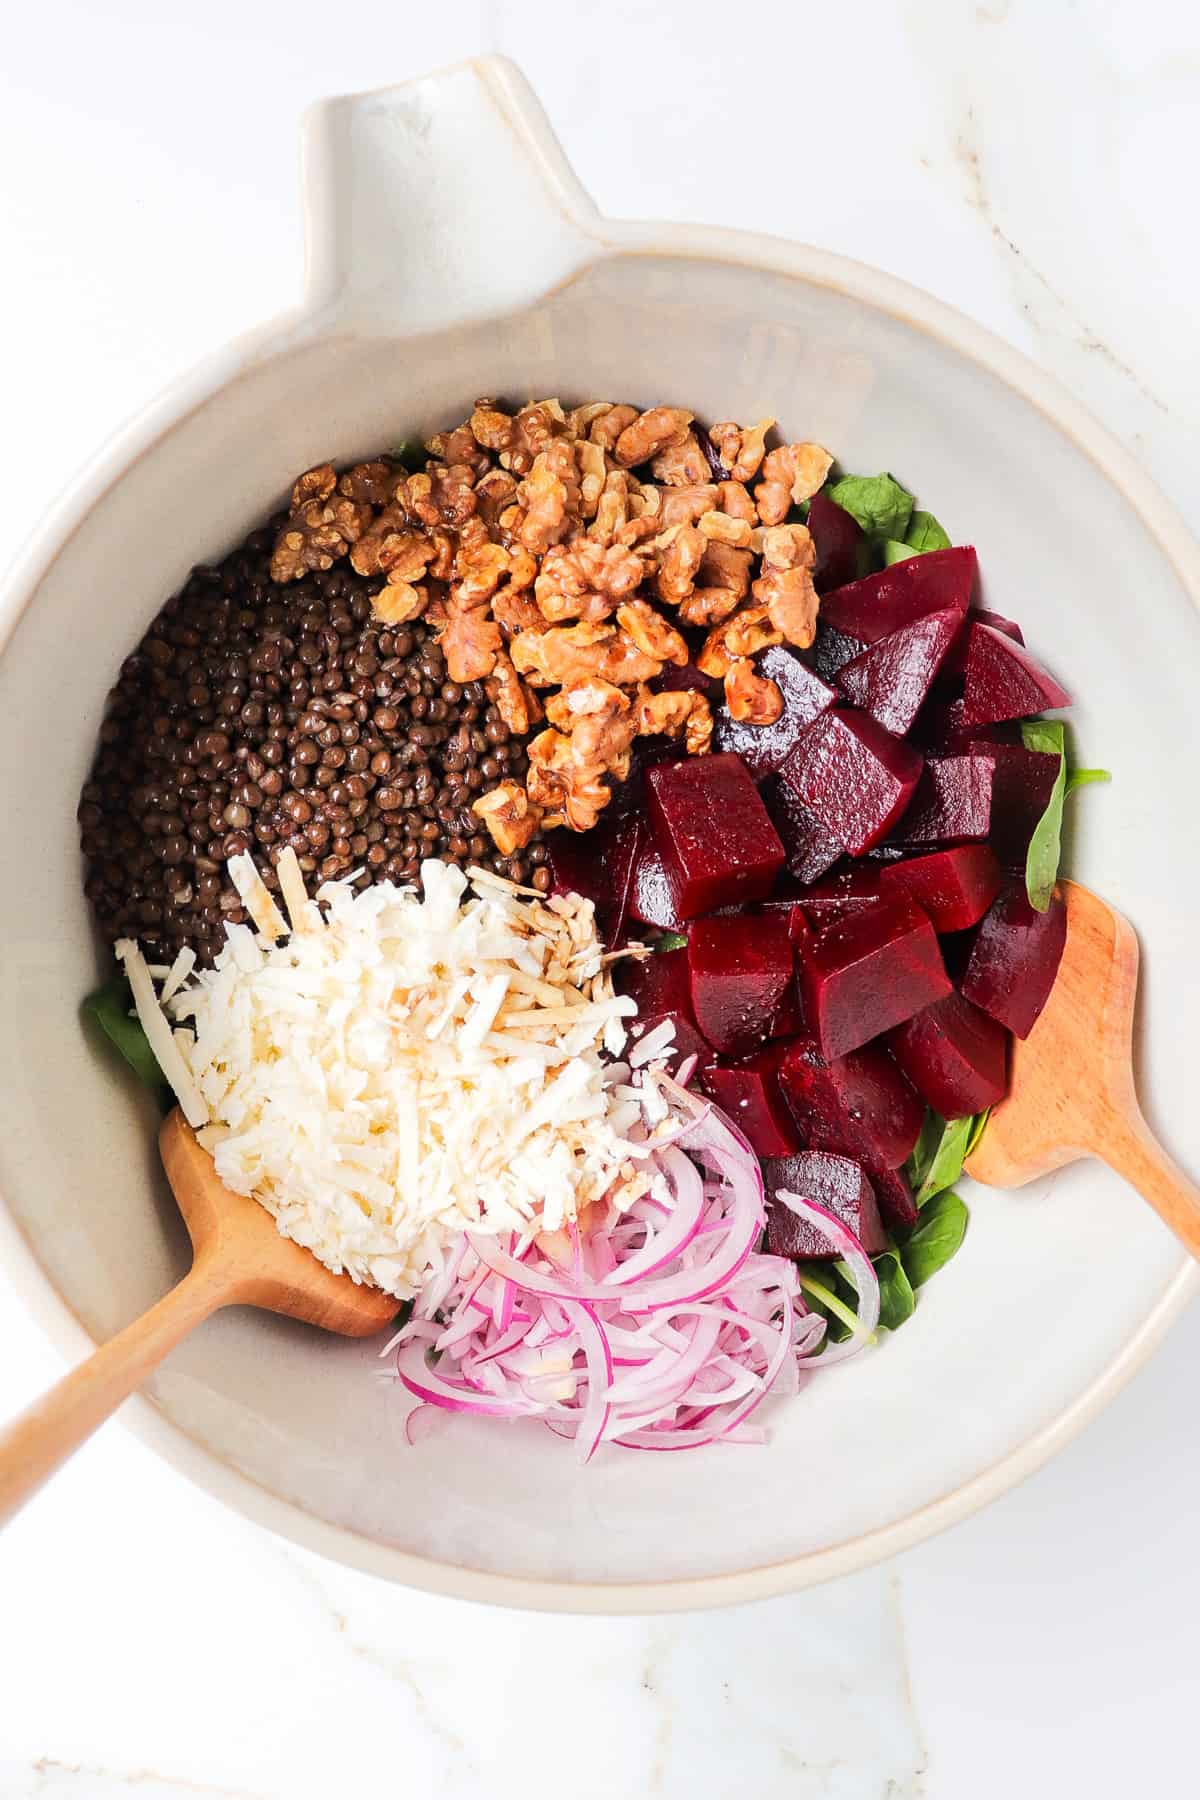 Spinach leaves, grated feta cheese, lentils, walnuts, beetroot and onions in a large mixing bowl with wooden spoons.